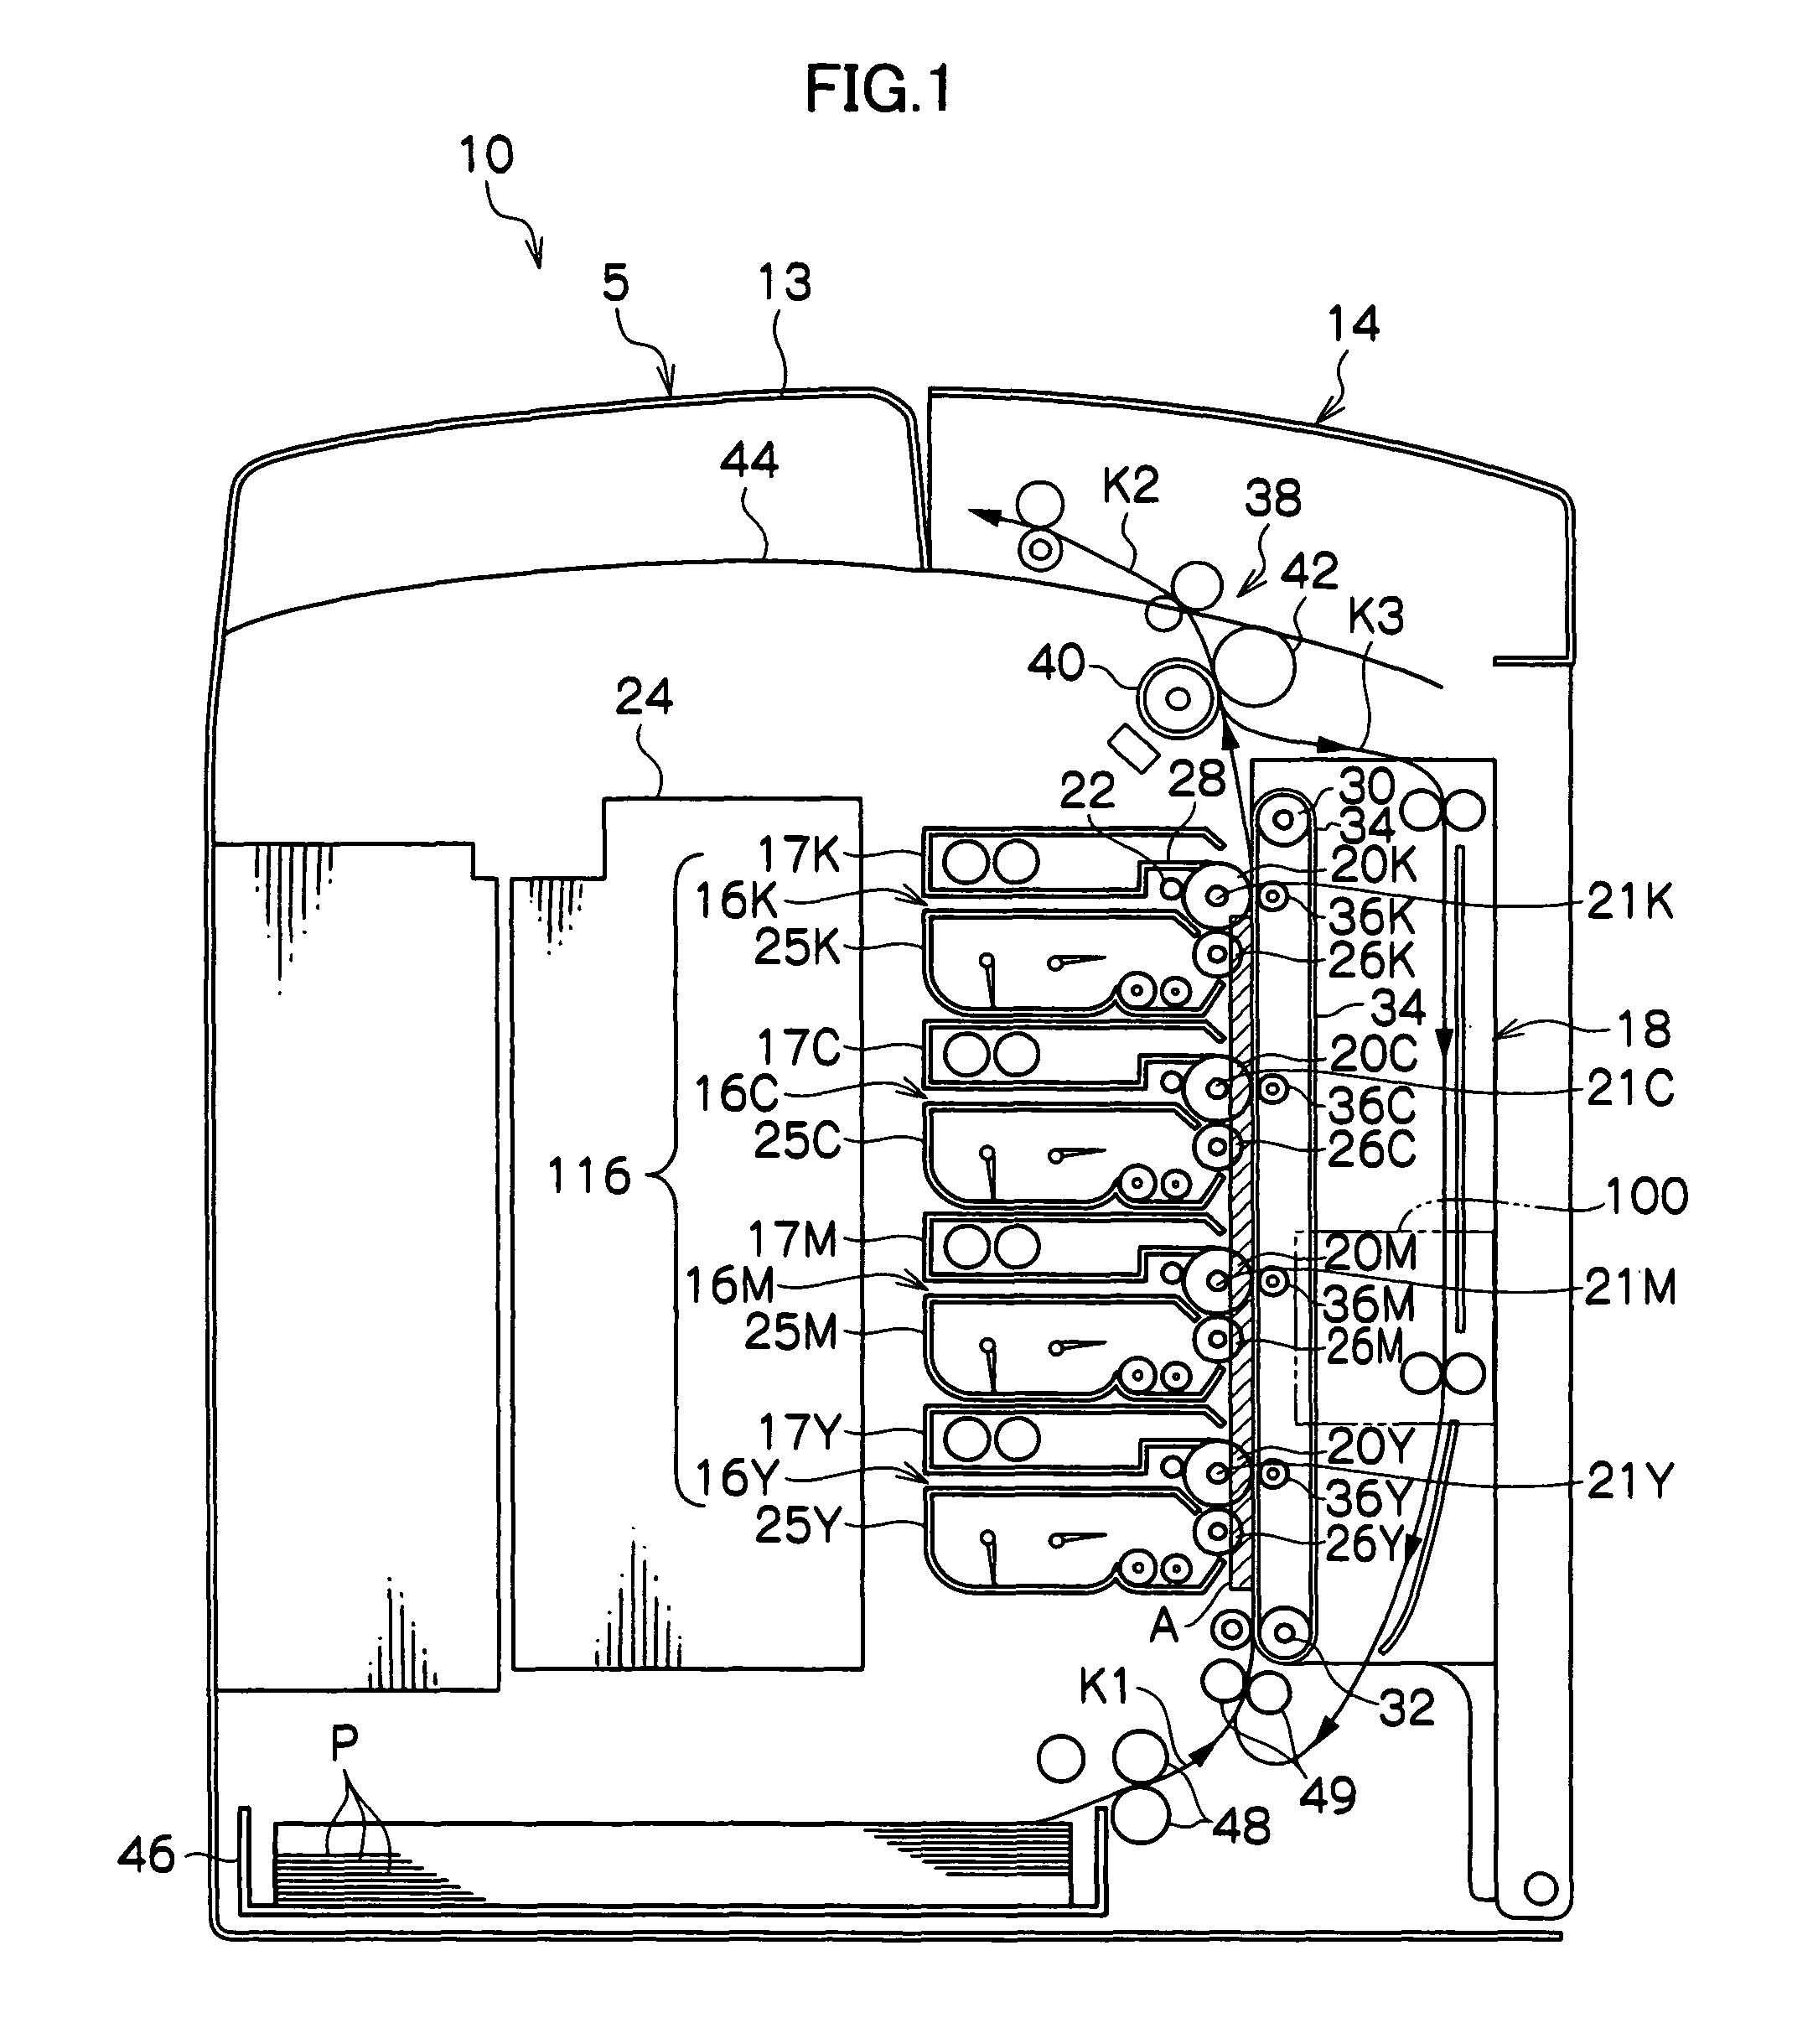 Image forming apparatus with cooling fan for cooling image holding members